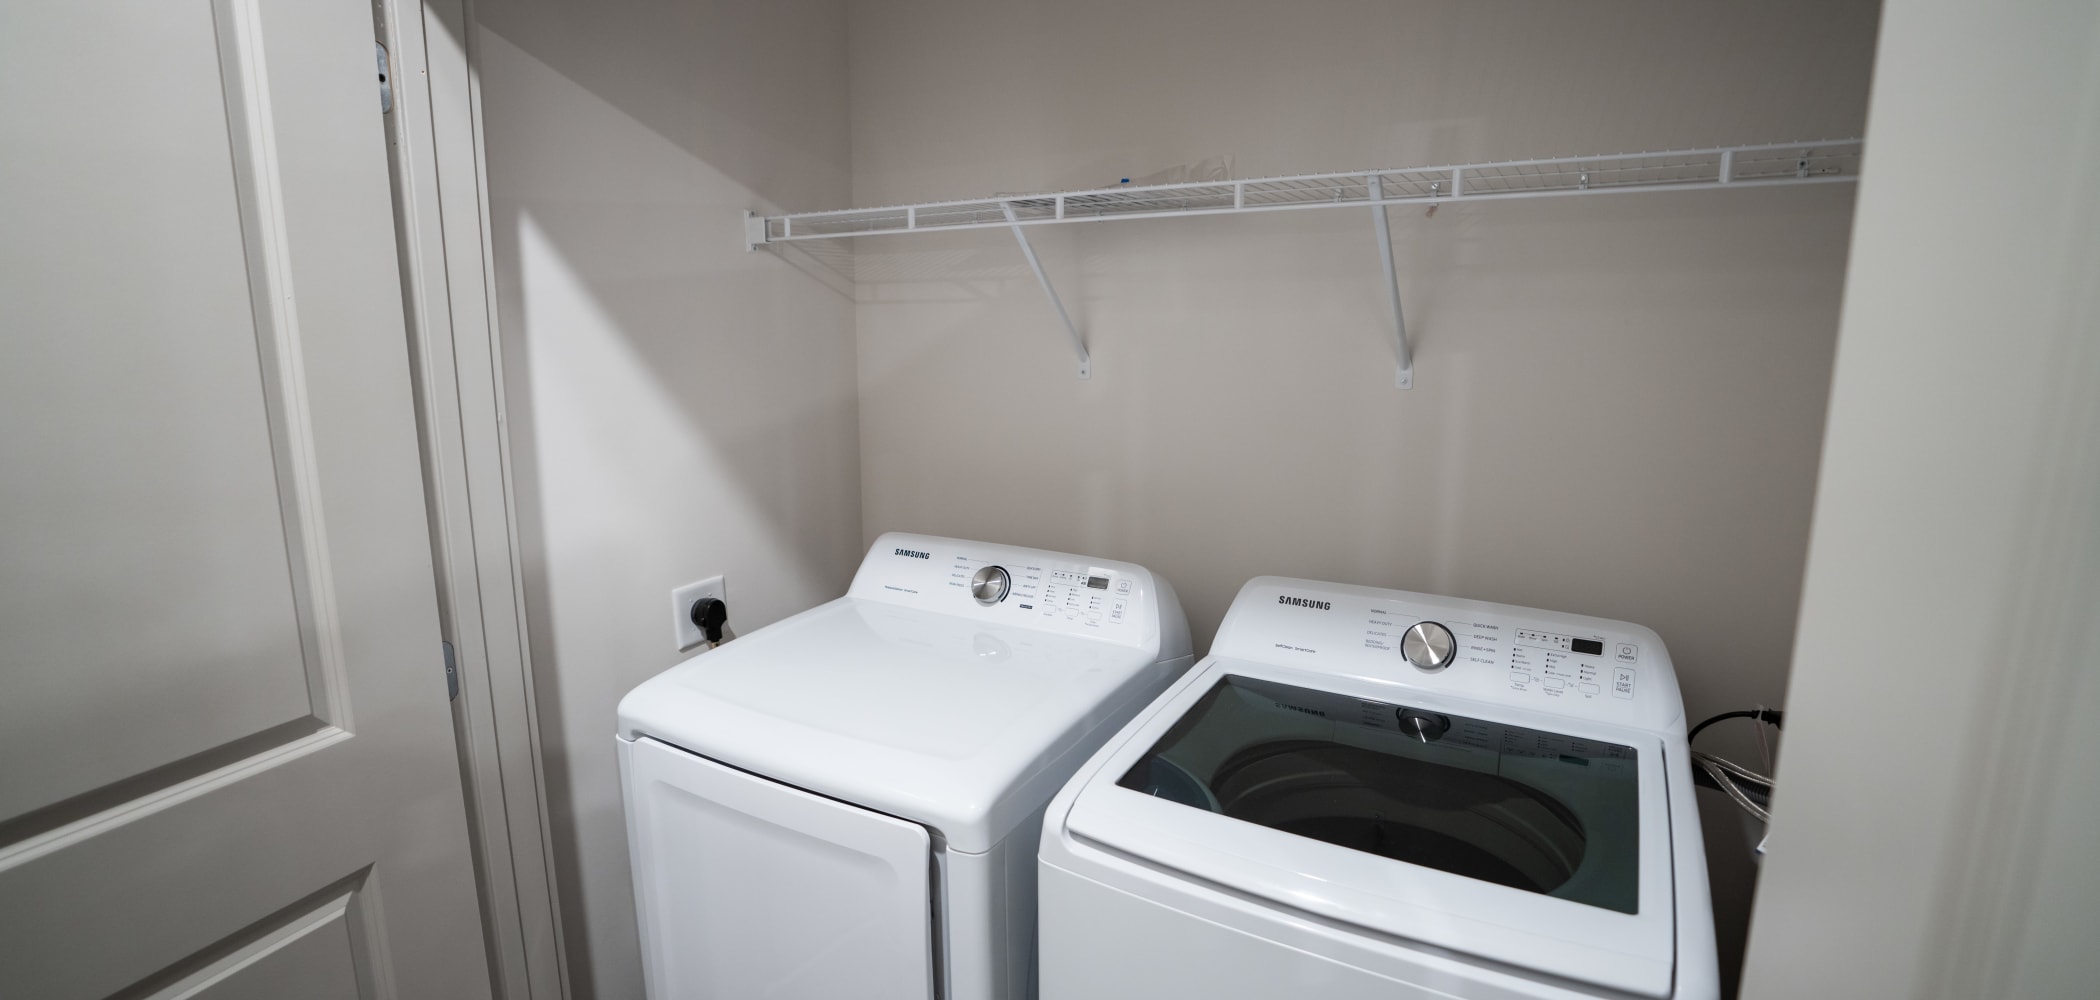 Student Apartments with In-Unit Washer/Dryers in Greenville, North Carolina